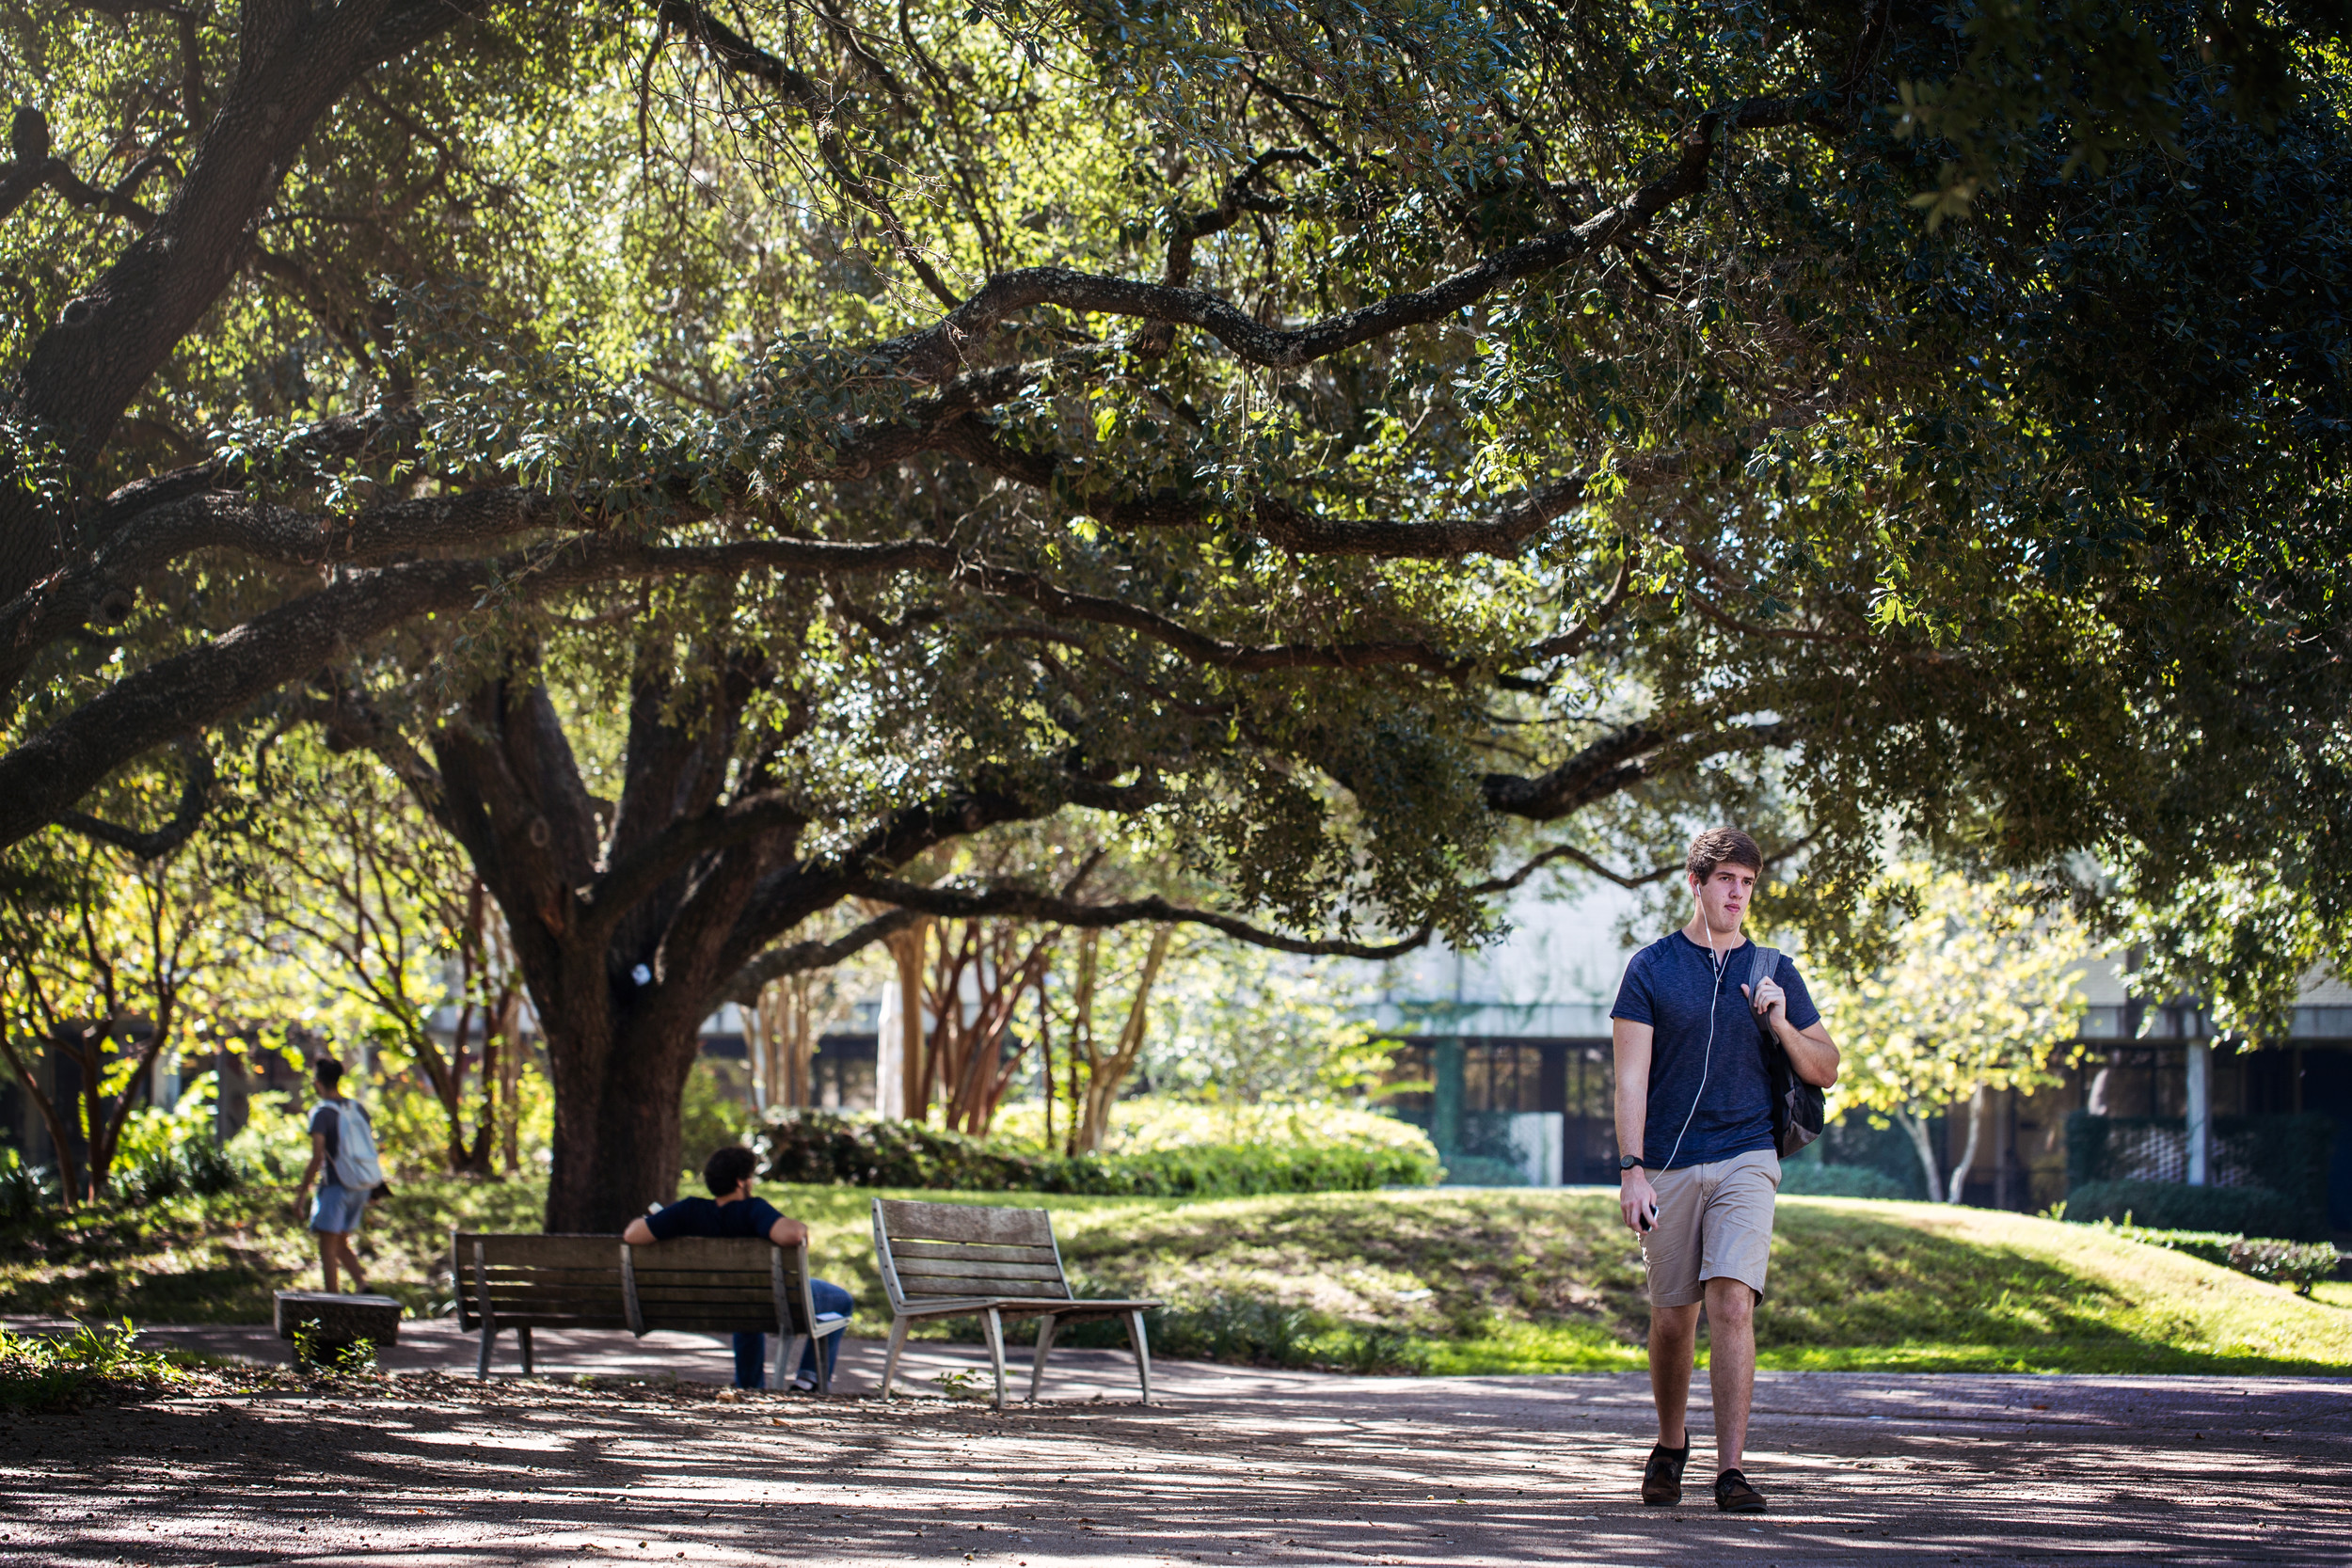 UH Ranked Among Great Value Colleges with Beautiful Campuses - University  of Houston